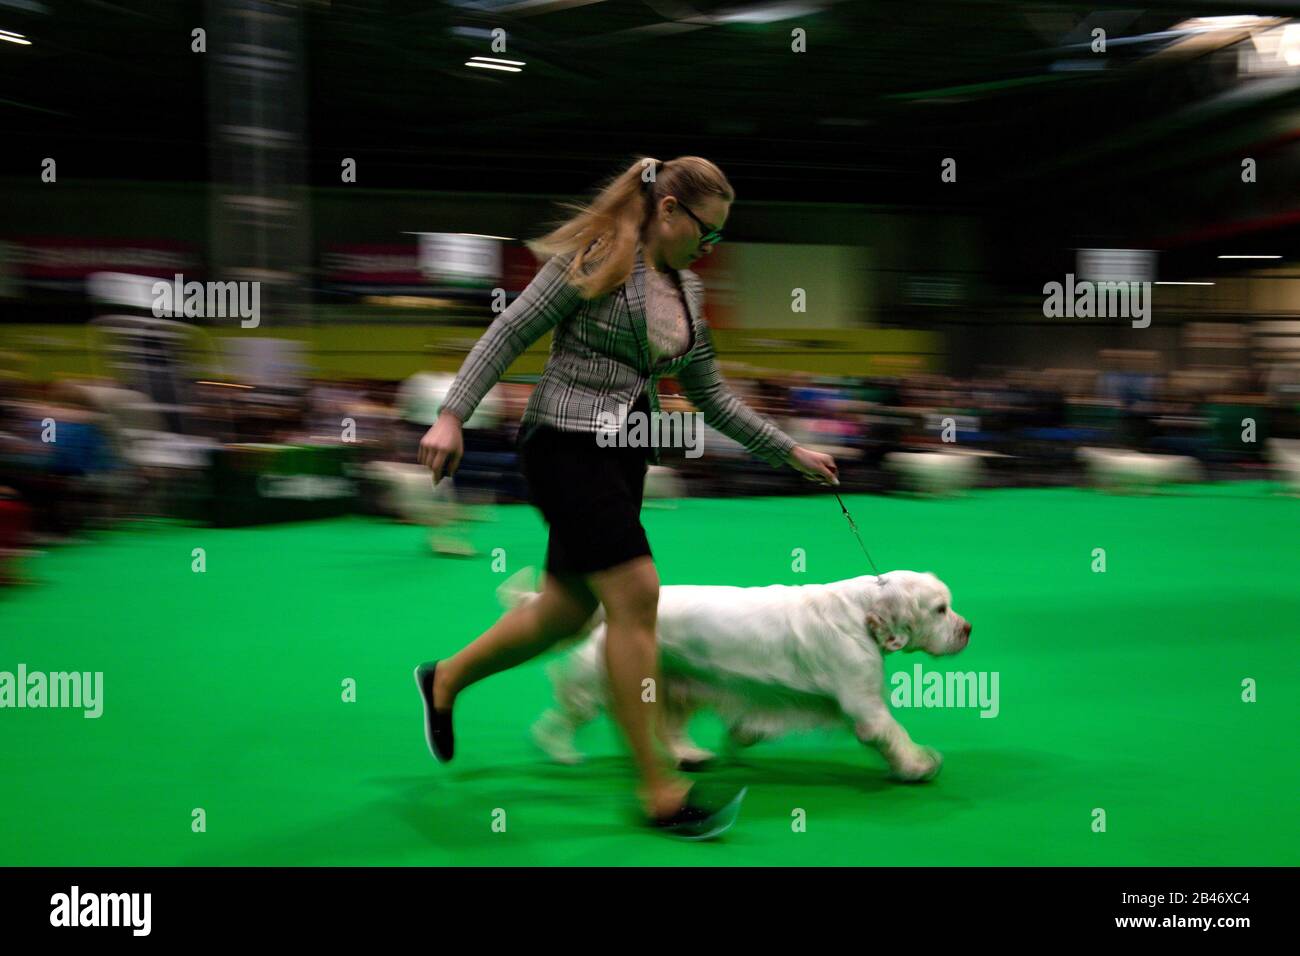 A trainer parades a Clumber Spaniel for judging at the Birmingham National Exhibition Centre (NEC) for the second day of the Crufts Dog Show. Stock Photo